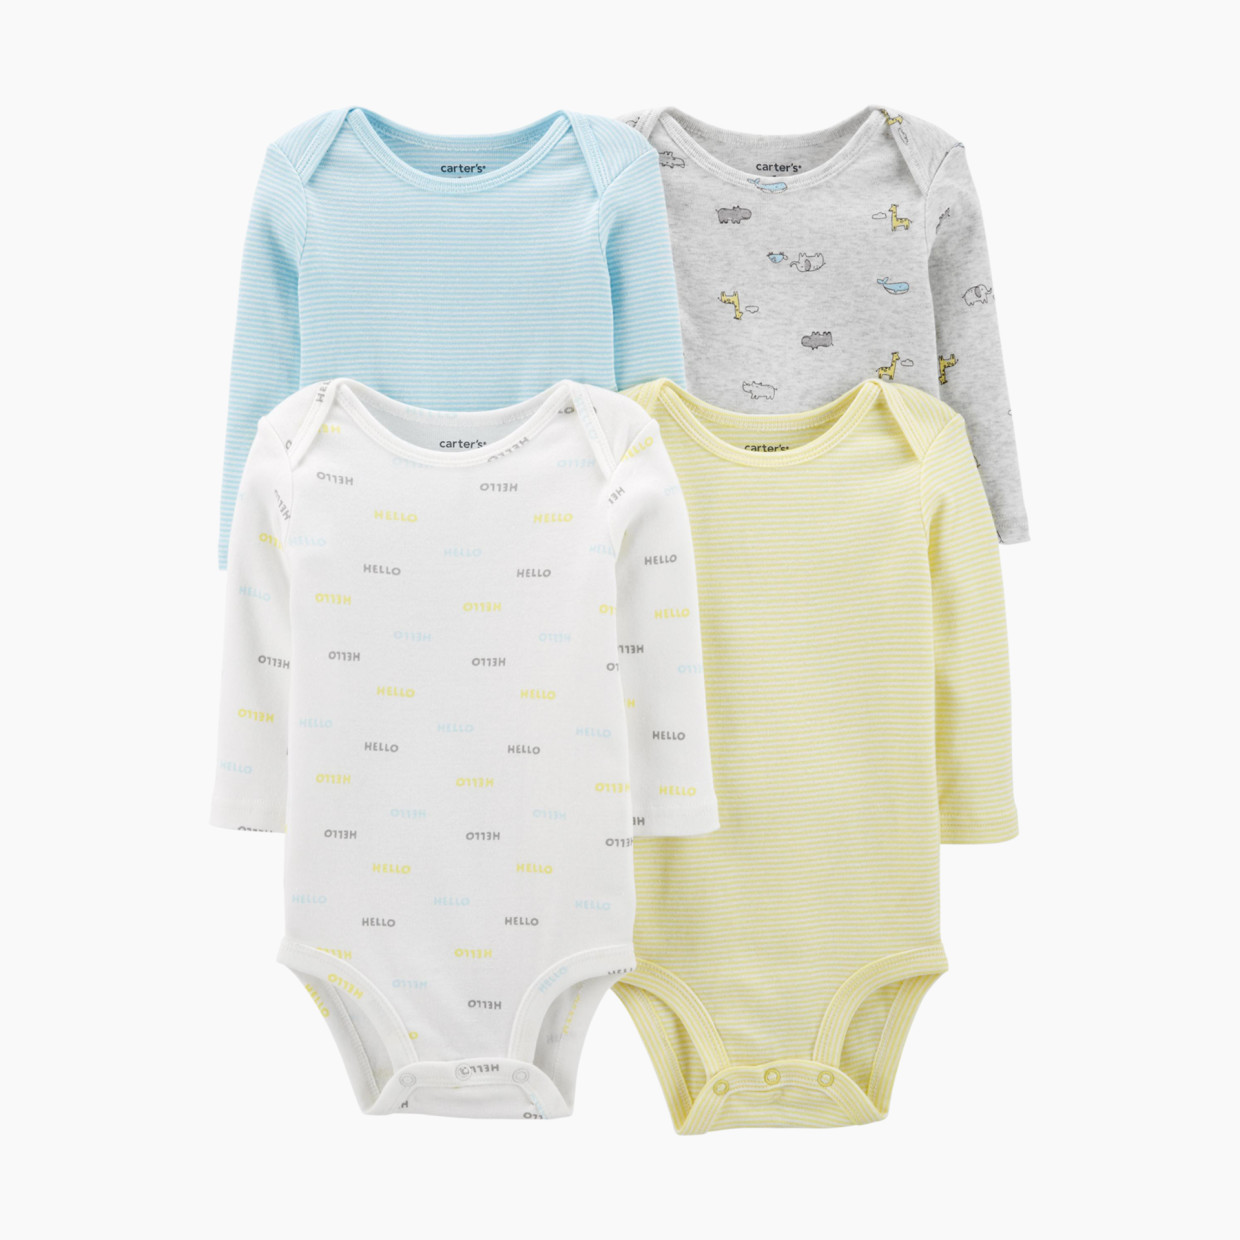 Carter's Long Sleeve Bodysuit (4 Pack) - Multi (Ivory Zoo Animals), 0-3 Months.